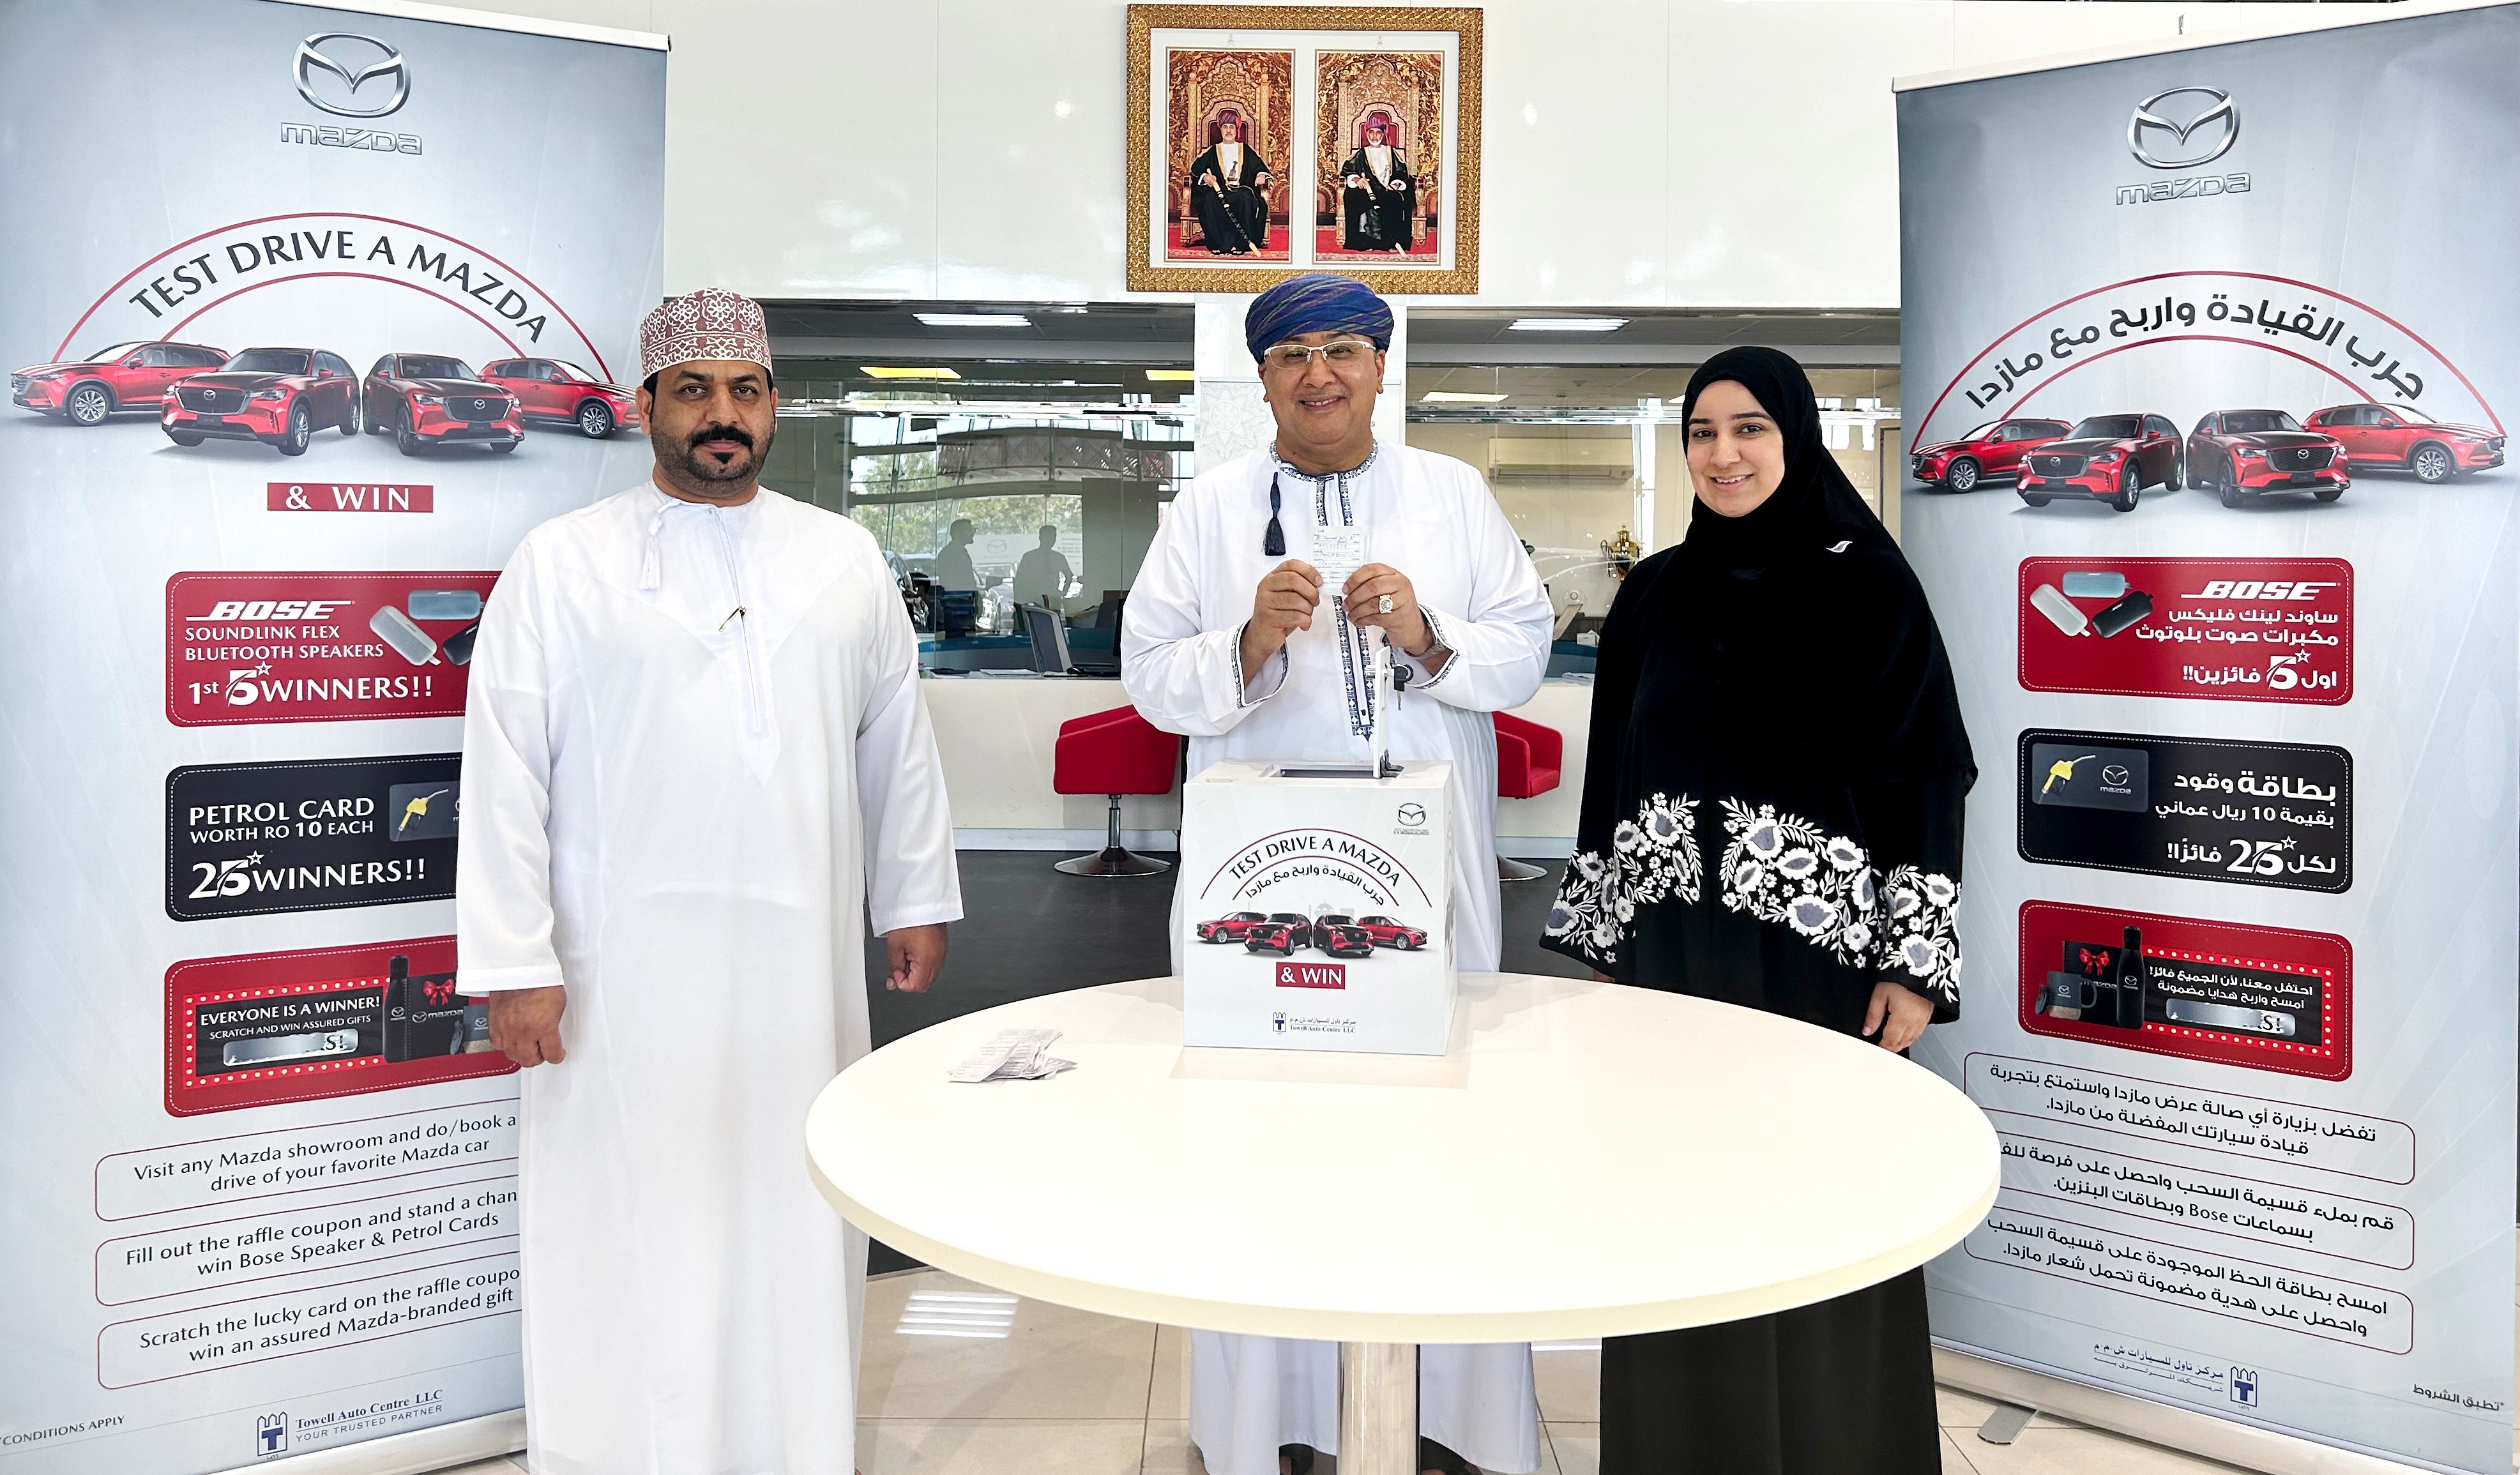 Test Drive A Mazda & Win Campaign Concludes With Raffle Draw